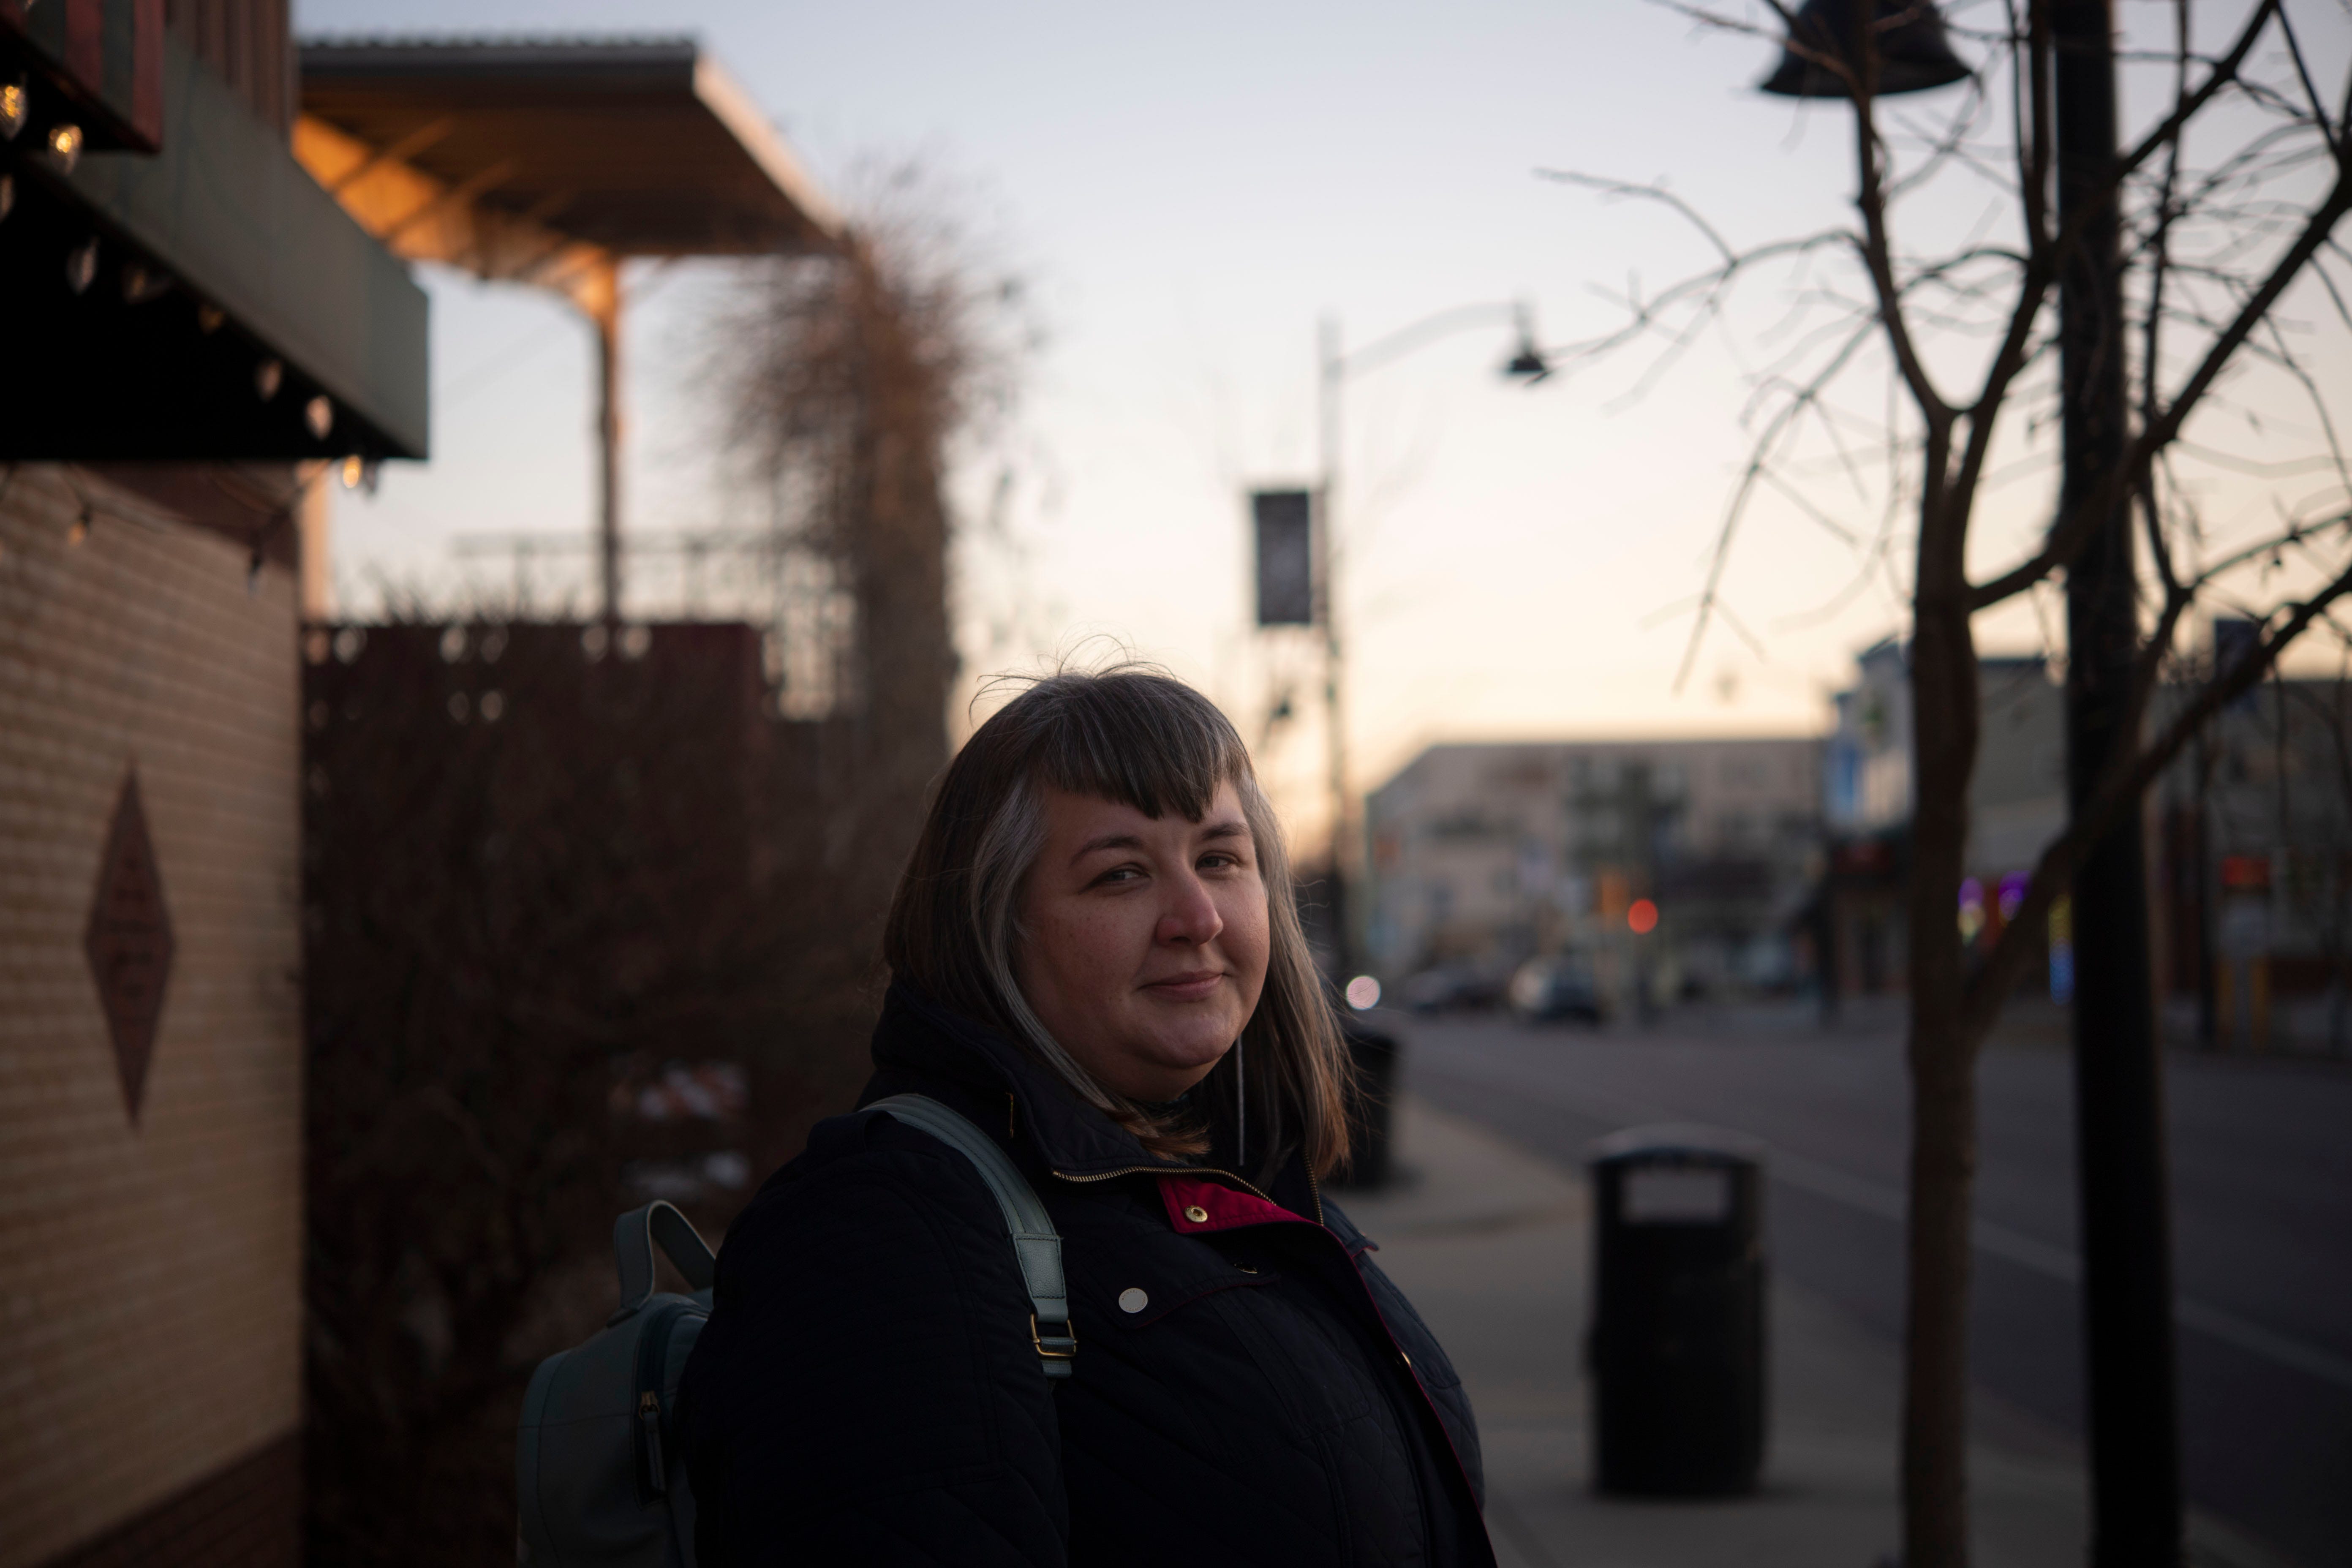 Jennifer Pepper worried she would struggle to hire staff for the Choices clinic, in a small town where a job would be a hard secret to keep. Instead, she found that some people wanted to be part of a historic moment.